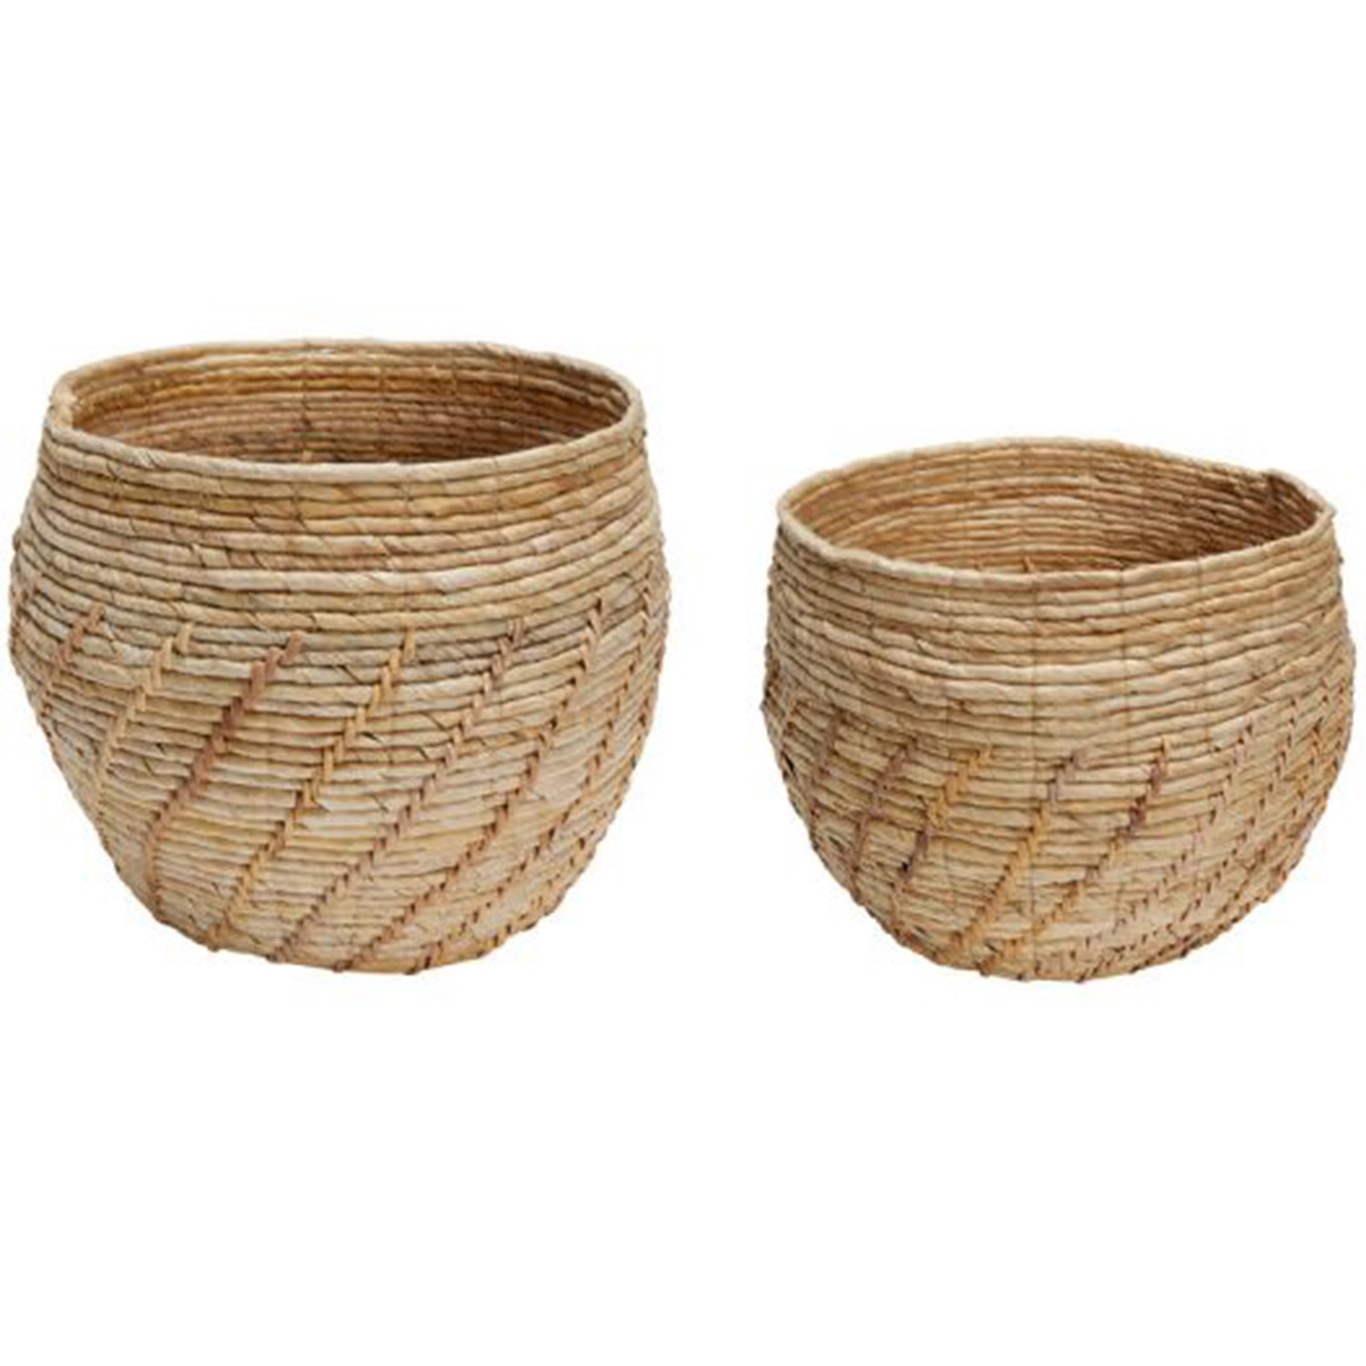 Luxe Round Baskets 2-pack, Natural